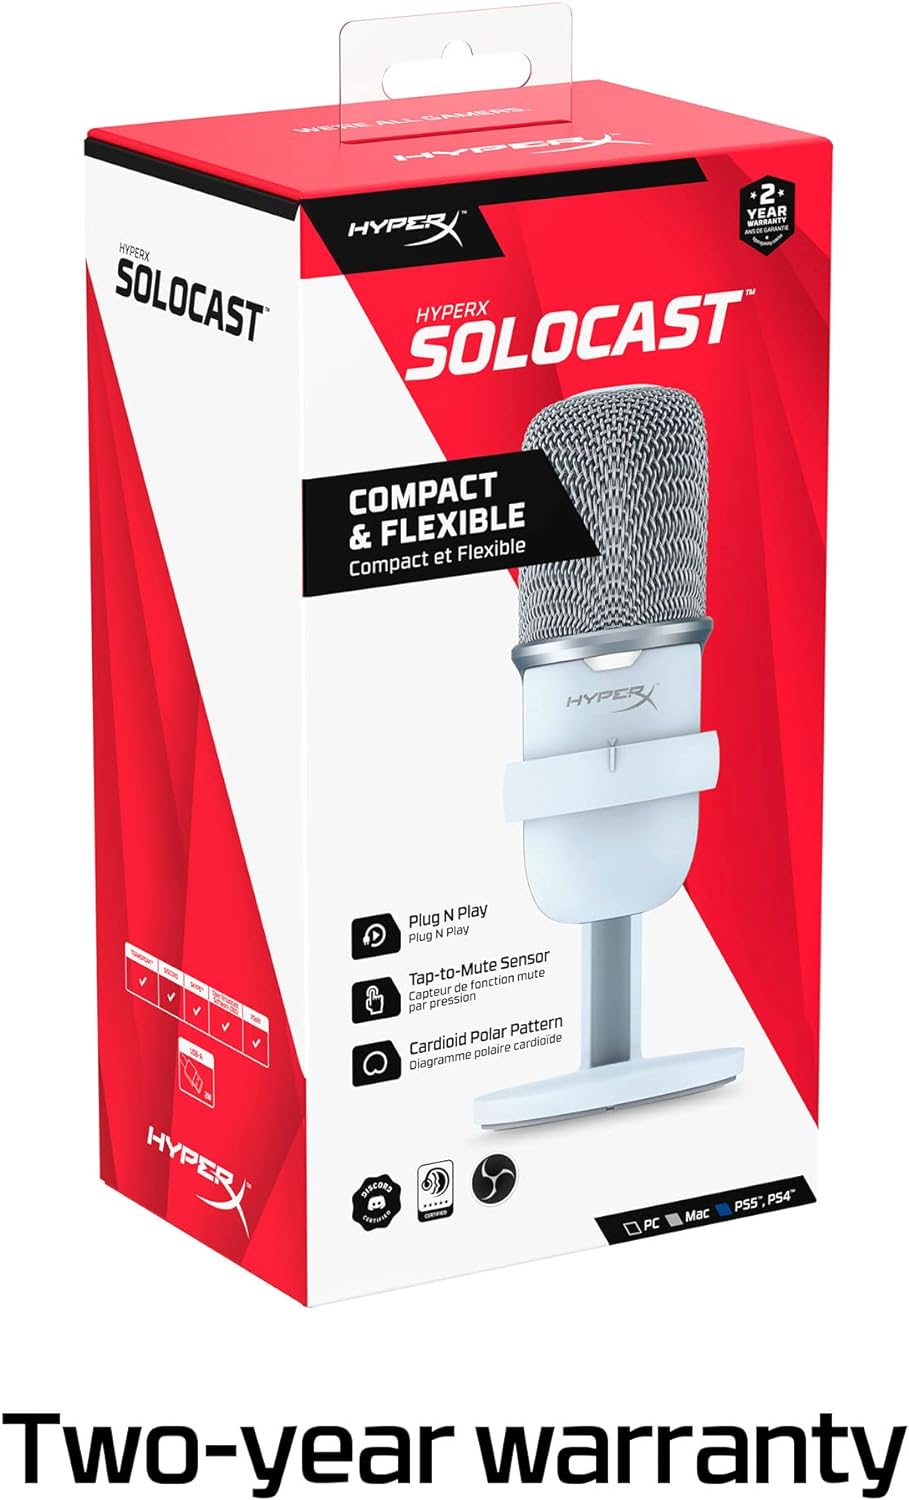 HyperX SoloCast- 24 Bit Upgrate - USB Condenser Gaming Microphone, for PC, PS4, and Mac, Tap-to-Mute Sensor, Cardioid Polar Pattern, Gaming, Streaming, Podcasts, Twitch, YouTube, Discord